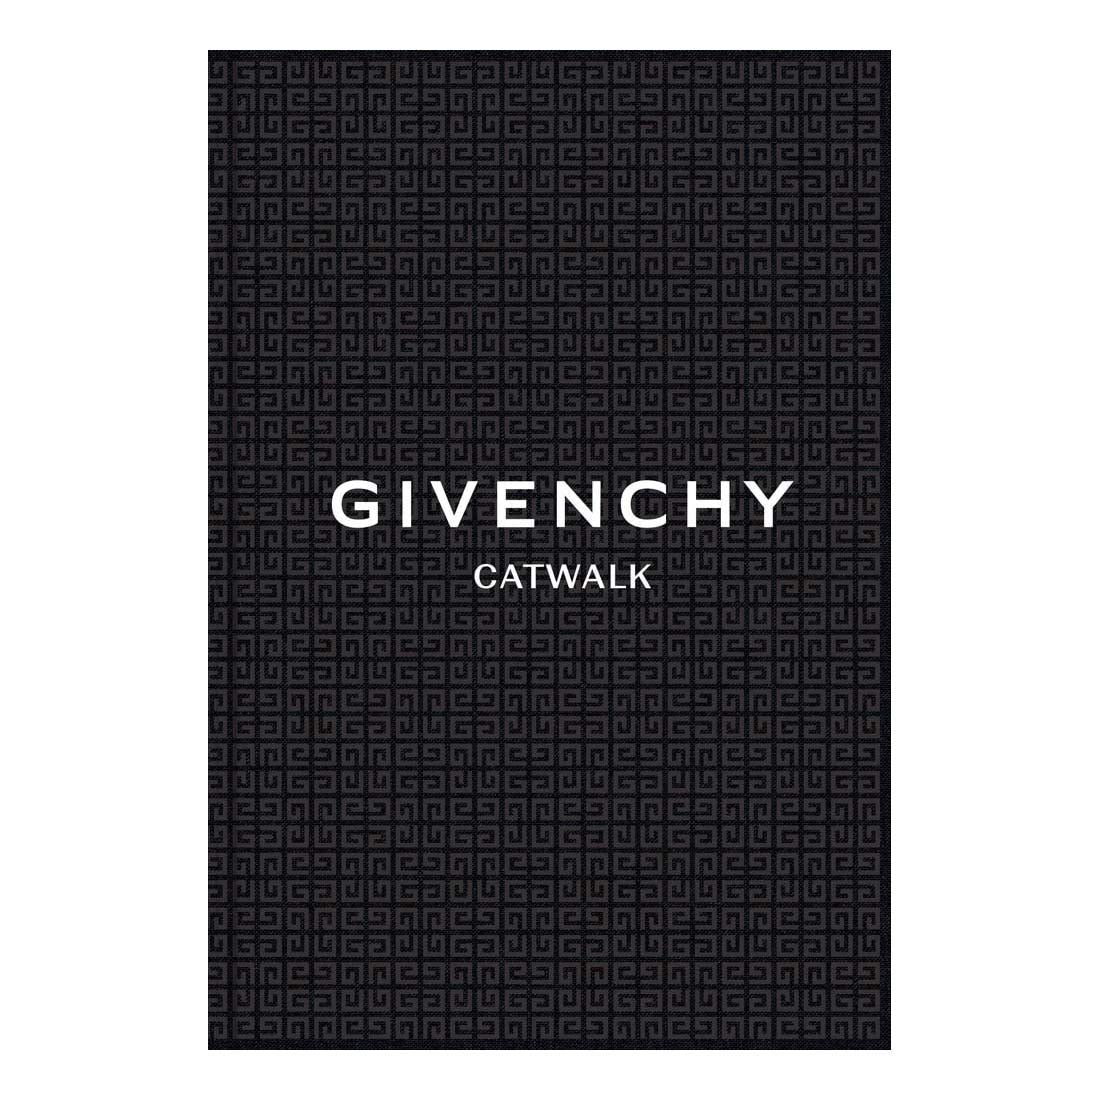 Givenchy: The Complete Collection